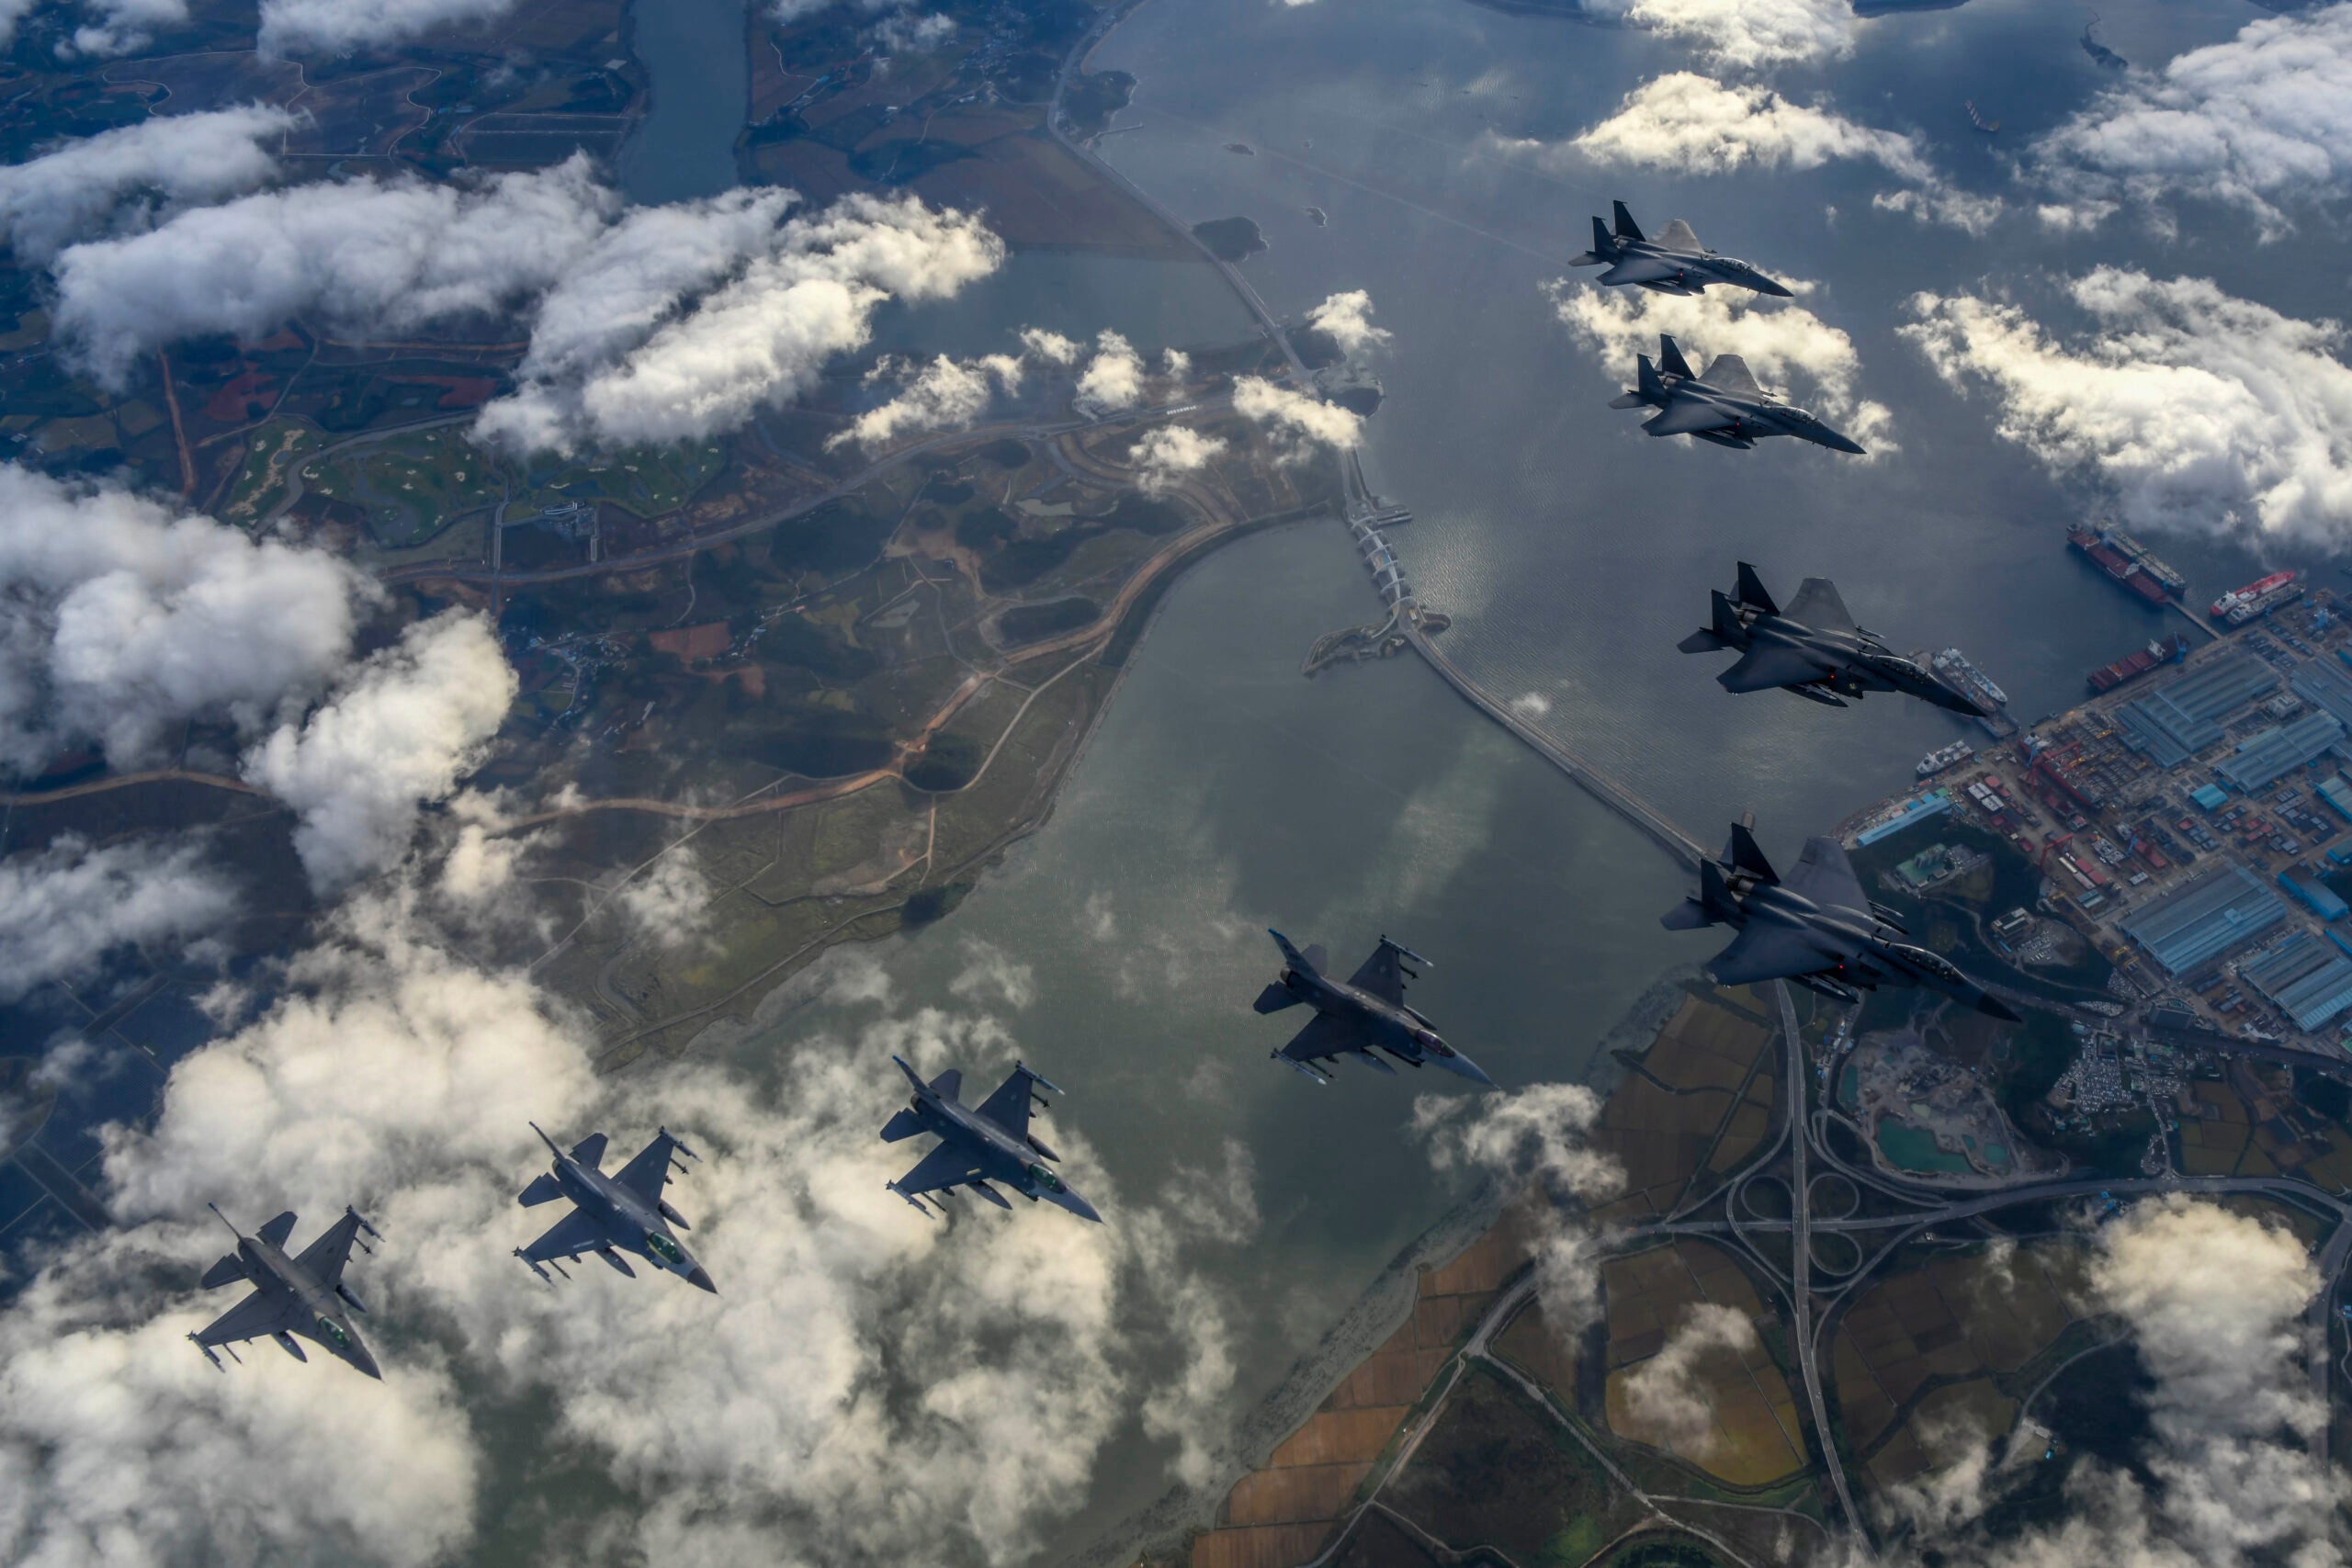 UNDISCLOSED LOCATION - OCTOBER 04: In this handout image released by the South Korean Defense Ministry, South Korean Air Force F-15Ks and U.S. Air Force F-16 fighter jets fly over the Korean Peninsula in response to North Korea's intermediate-range ballistic missile (IRBM) launch earlier in the day, on October 04, 2022 at an undisclosed location.North Korea fired an intermediate-range ballistic missile (IRBM) over Japan on Tuesday in its first launch of an IRBM in eight months, according to South Korea’s military. (Photo by South Korean Defense Ministry via Getty Images)